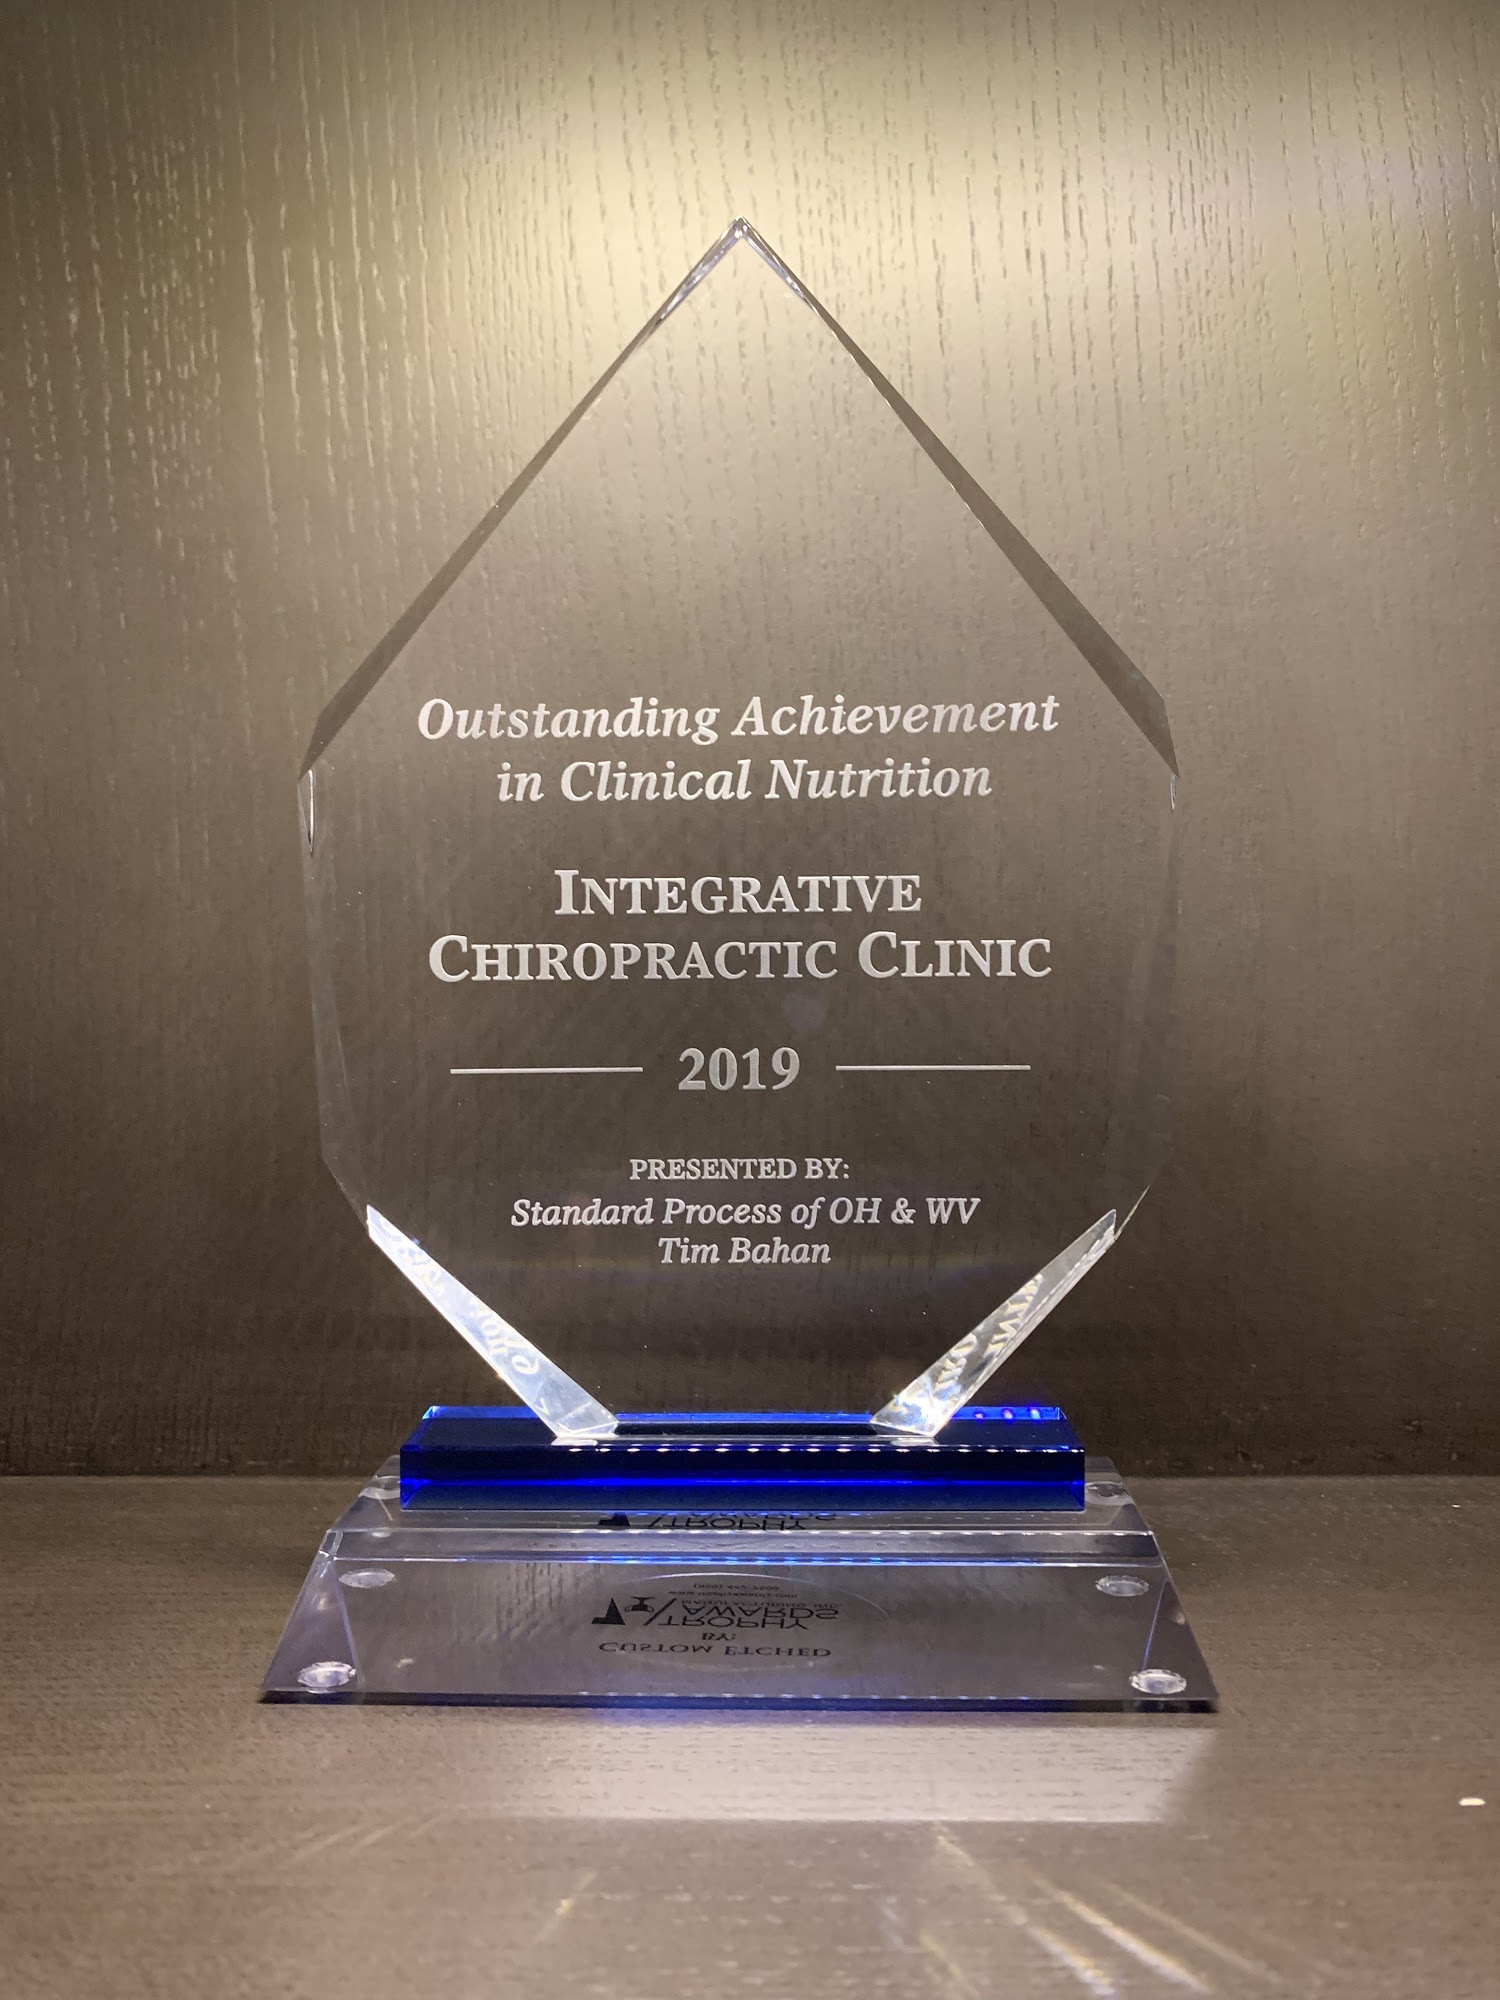 Integrative Chiropractic Clinic- Dr. Ming Je Huang